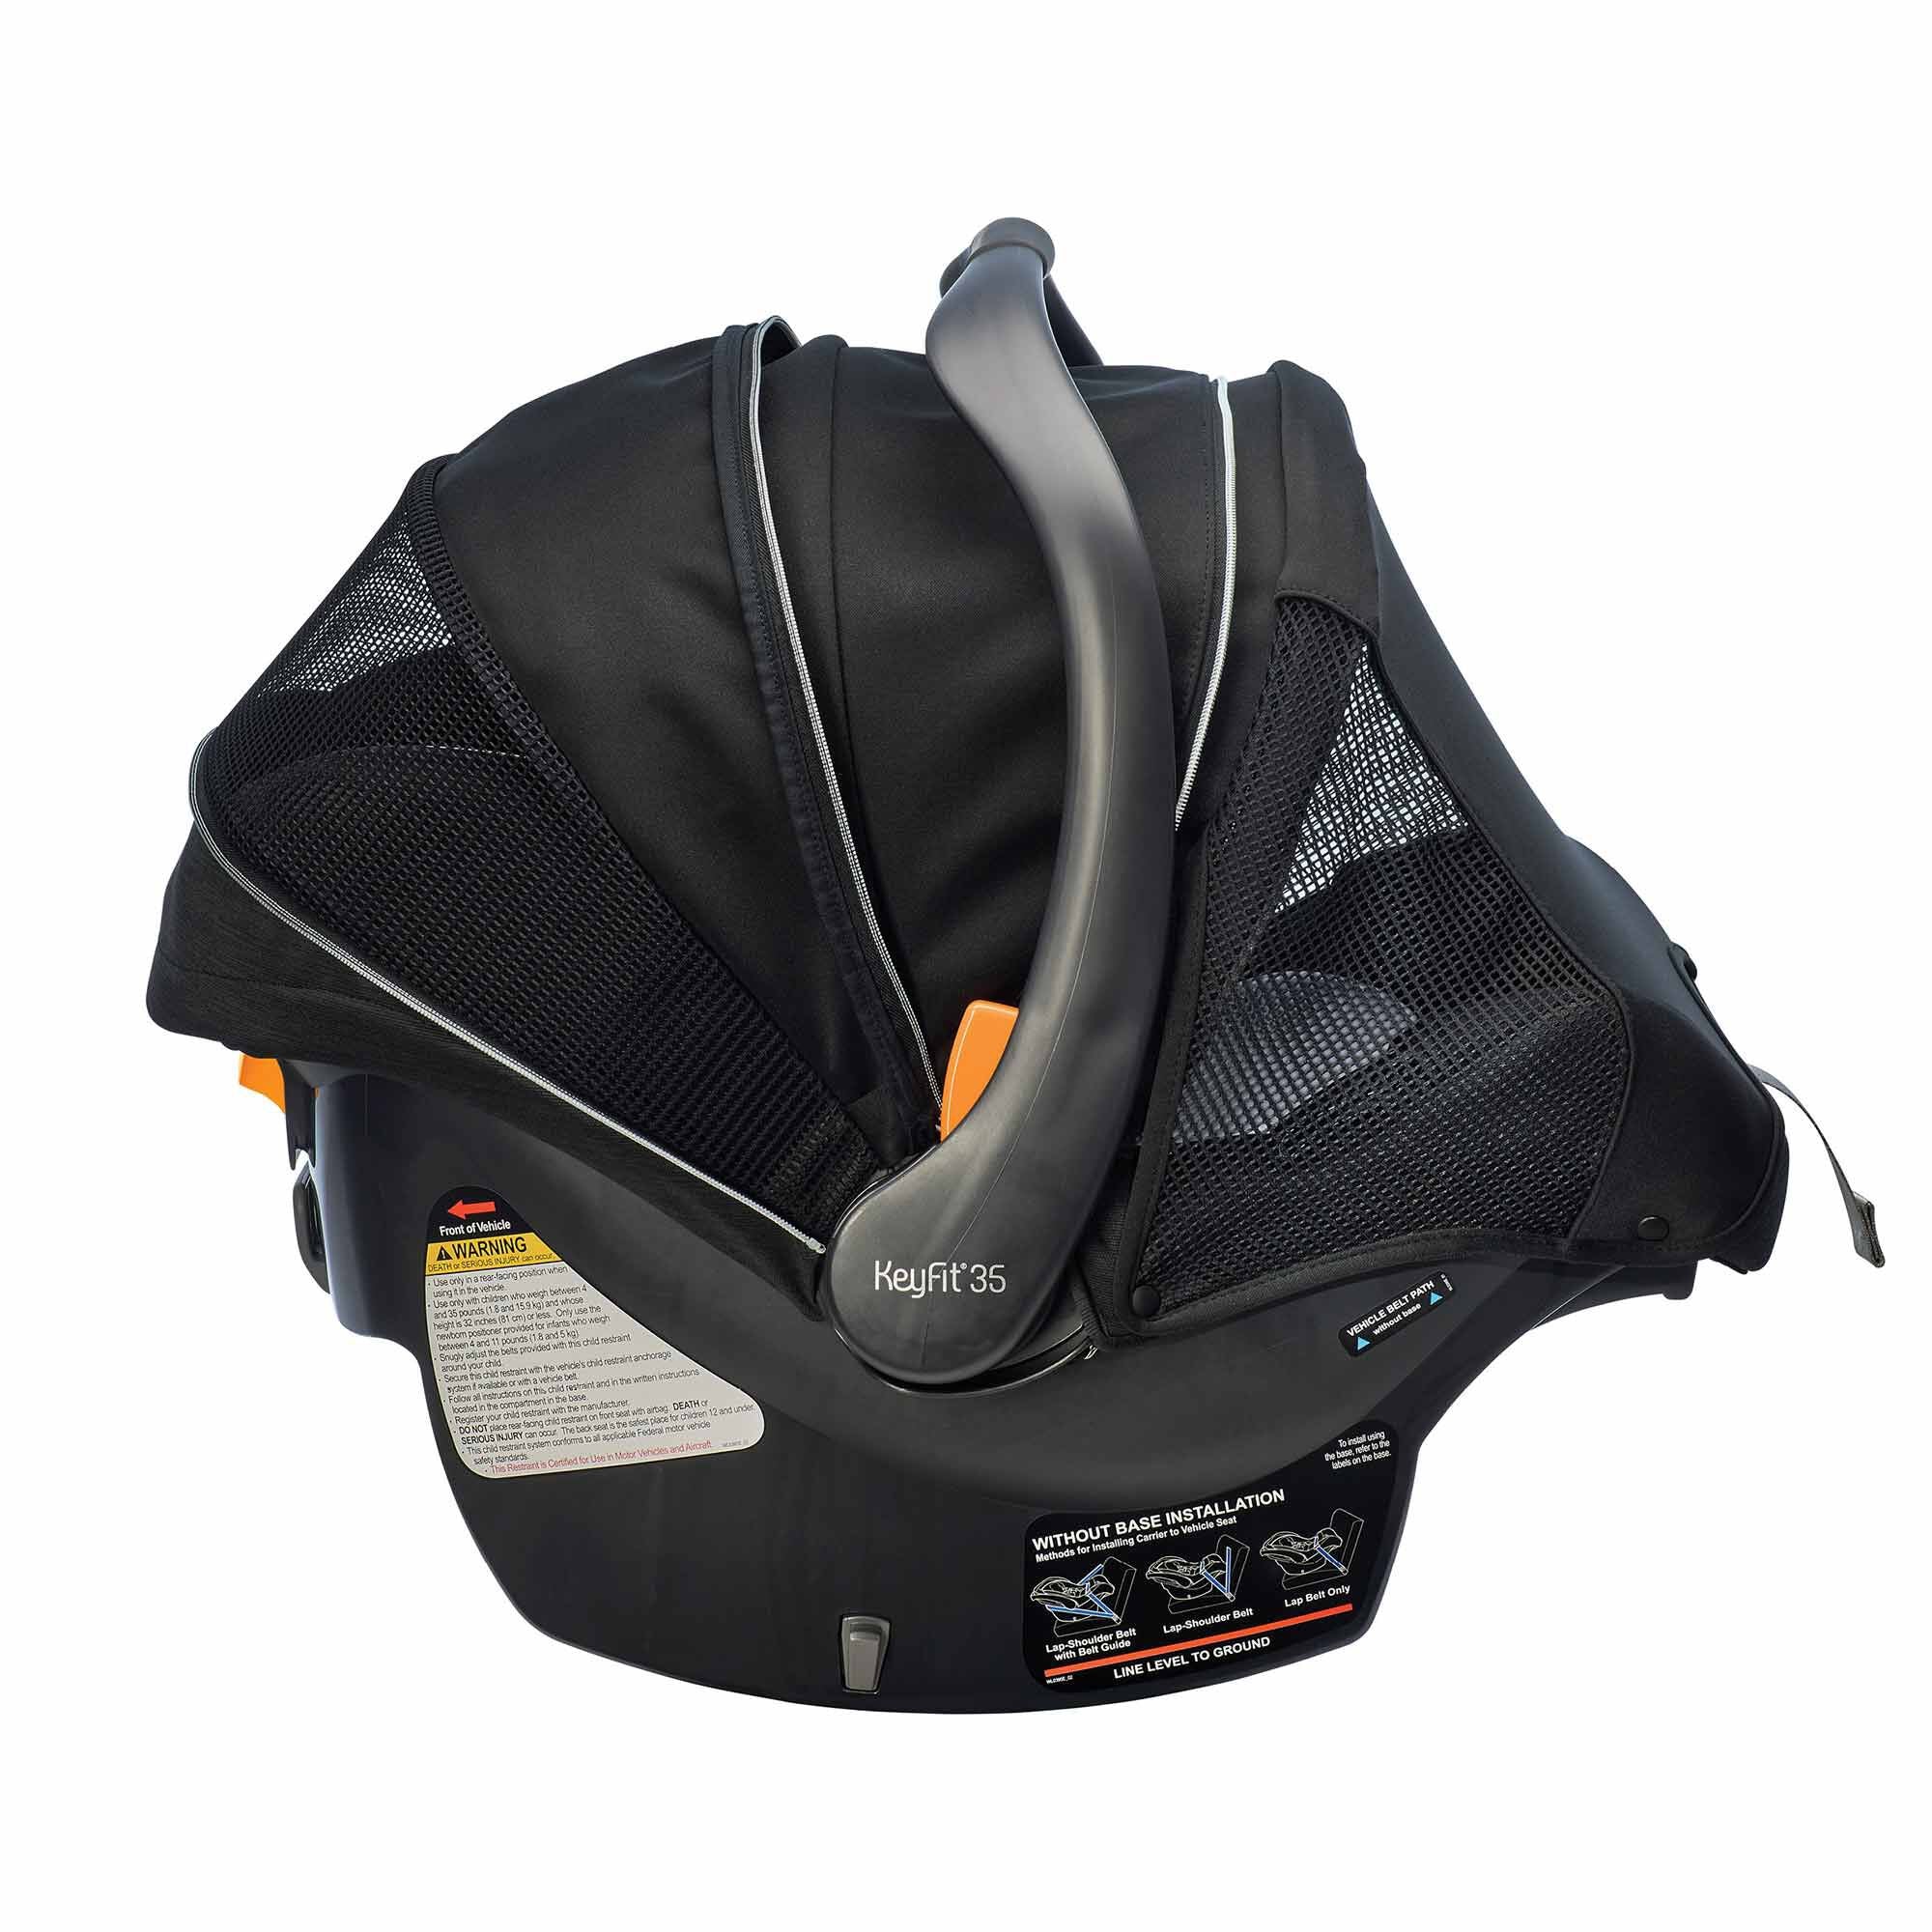 Chicco KeyFit 35 Zip ClearTex Infant Car Seat - Obsidian